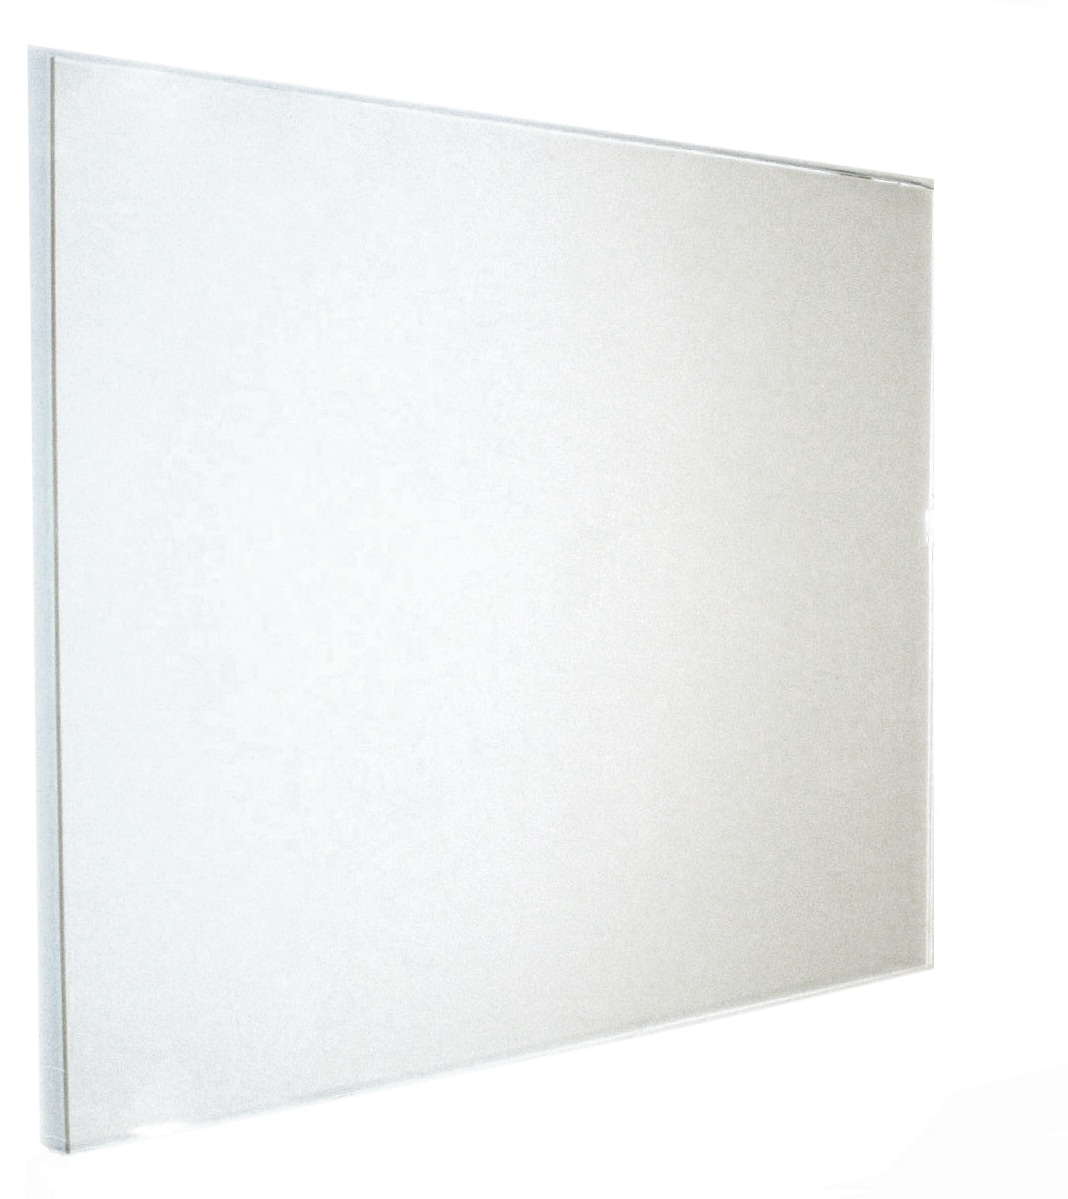 Gardner Glass Products 18-in x 24-in Clear Glass in the